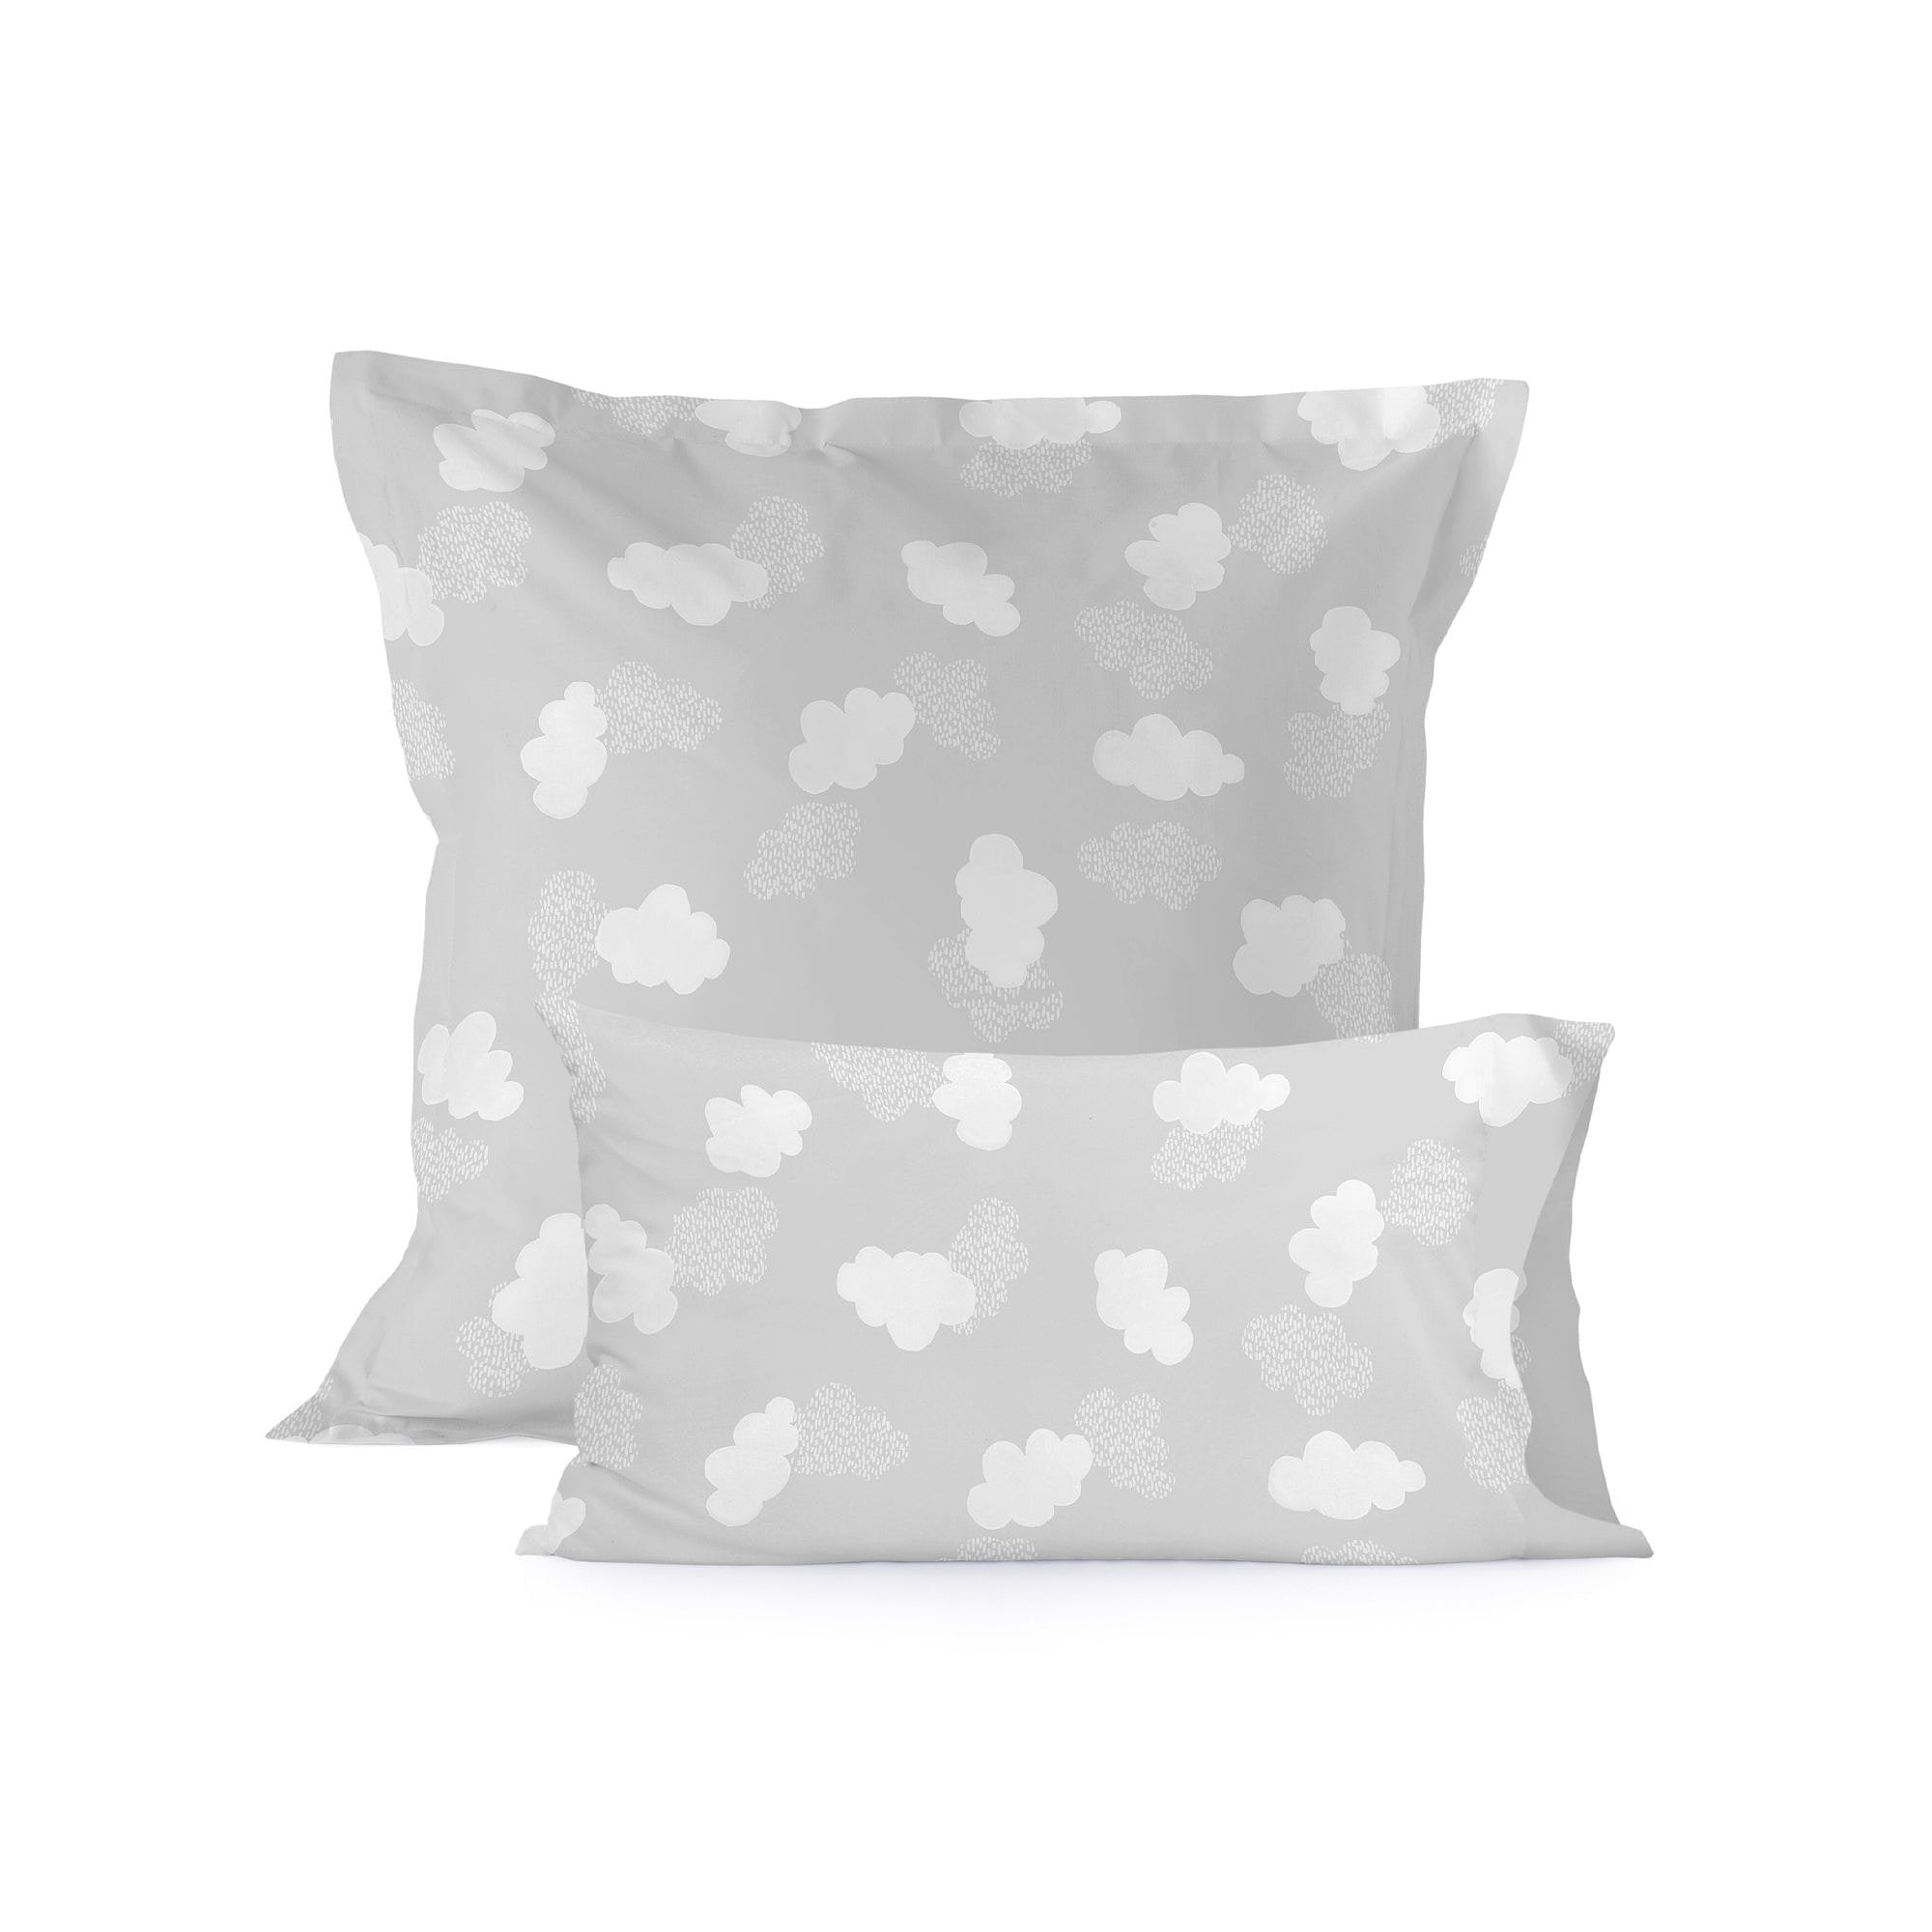 Happy Friday Pillow cover infantiles Clouds grey 80x80 cm Grey